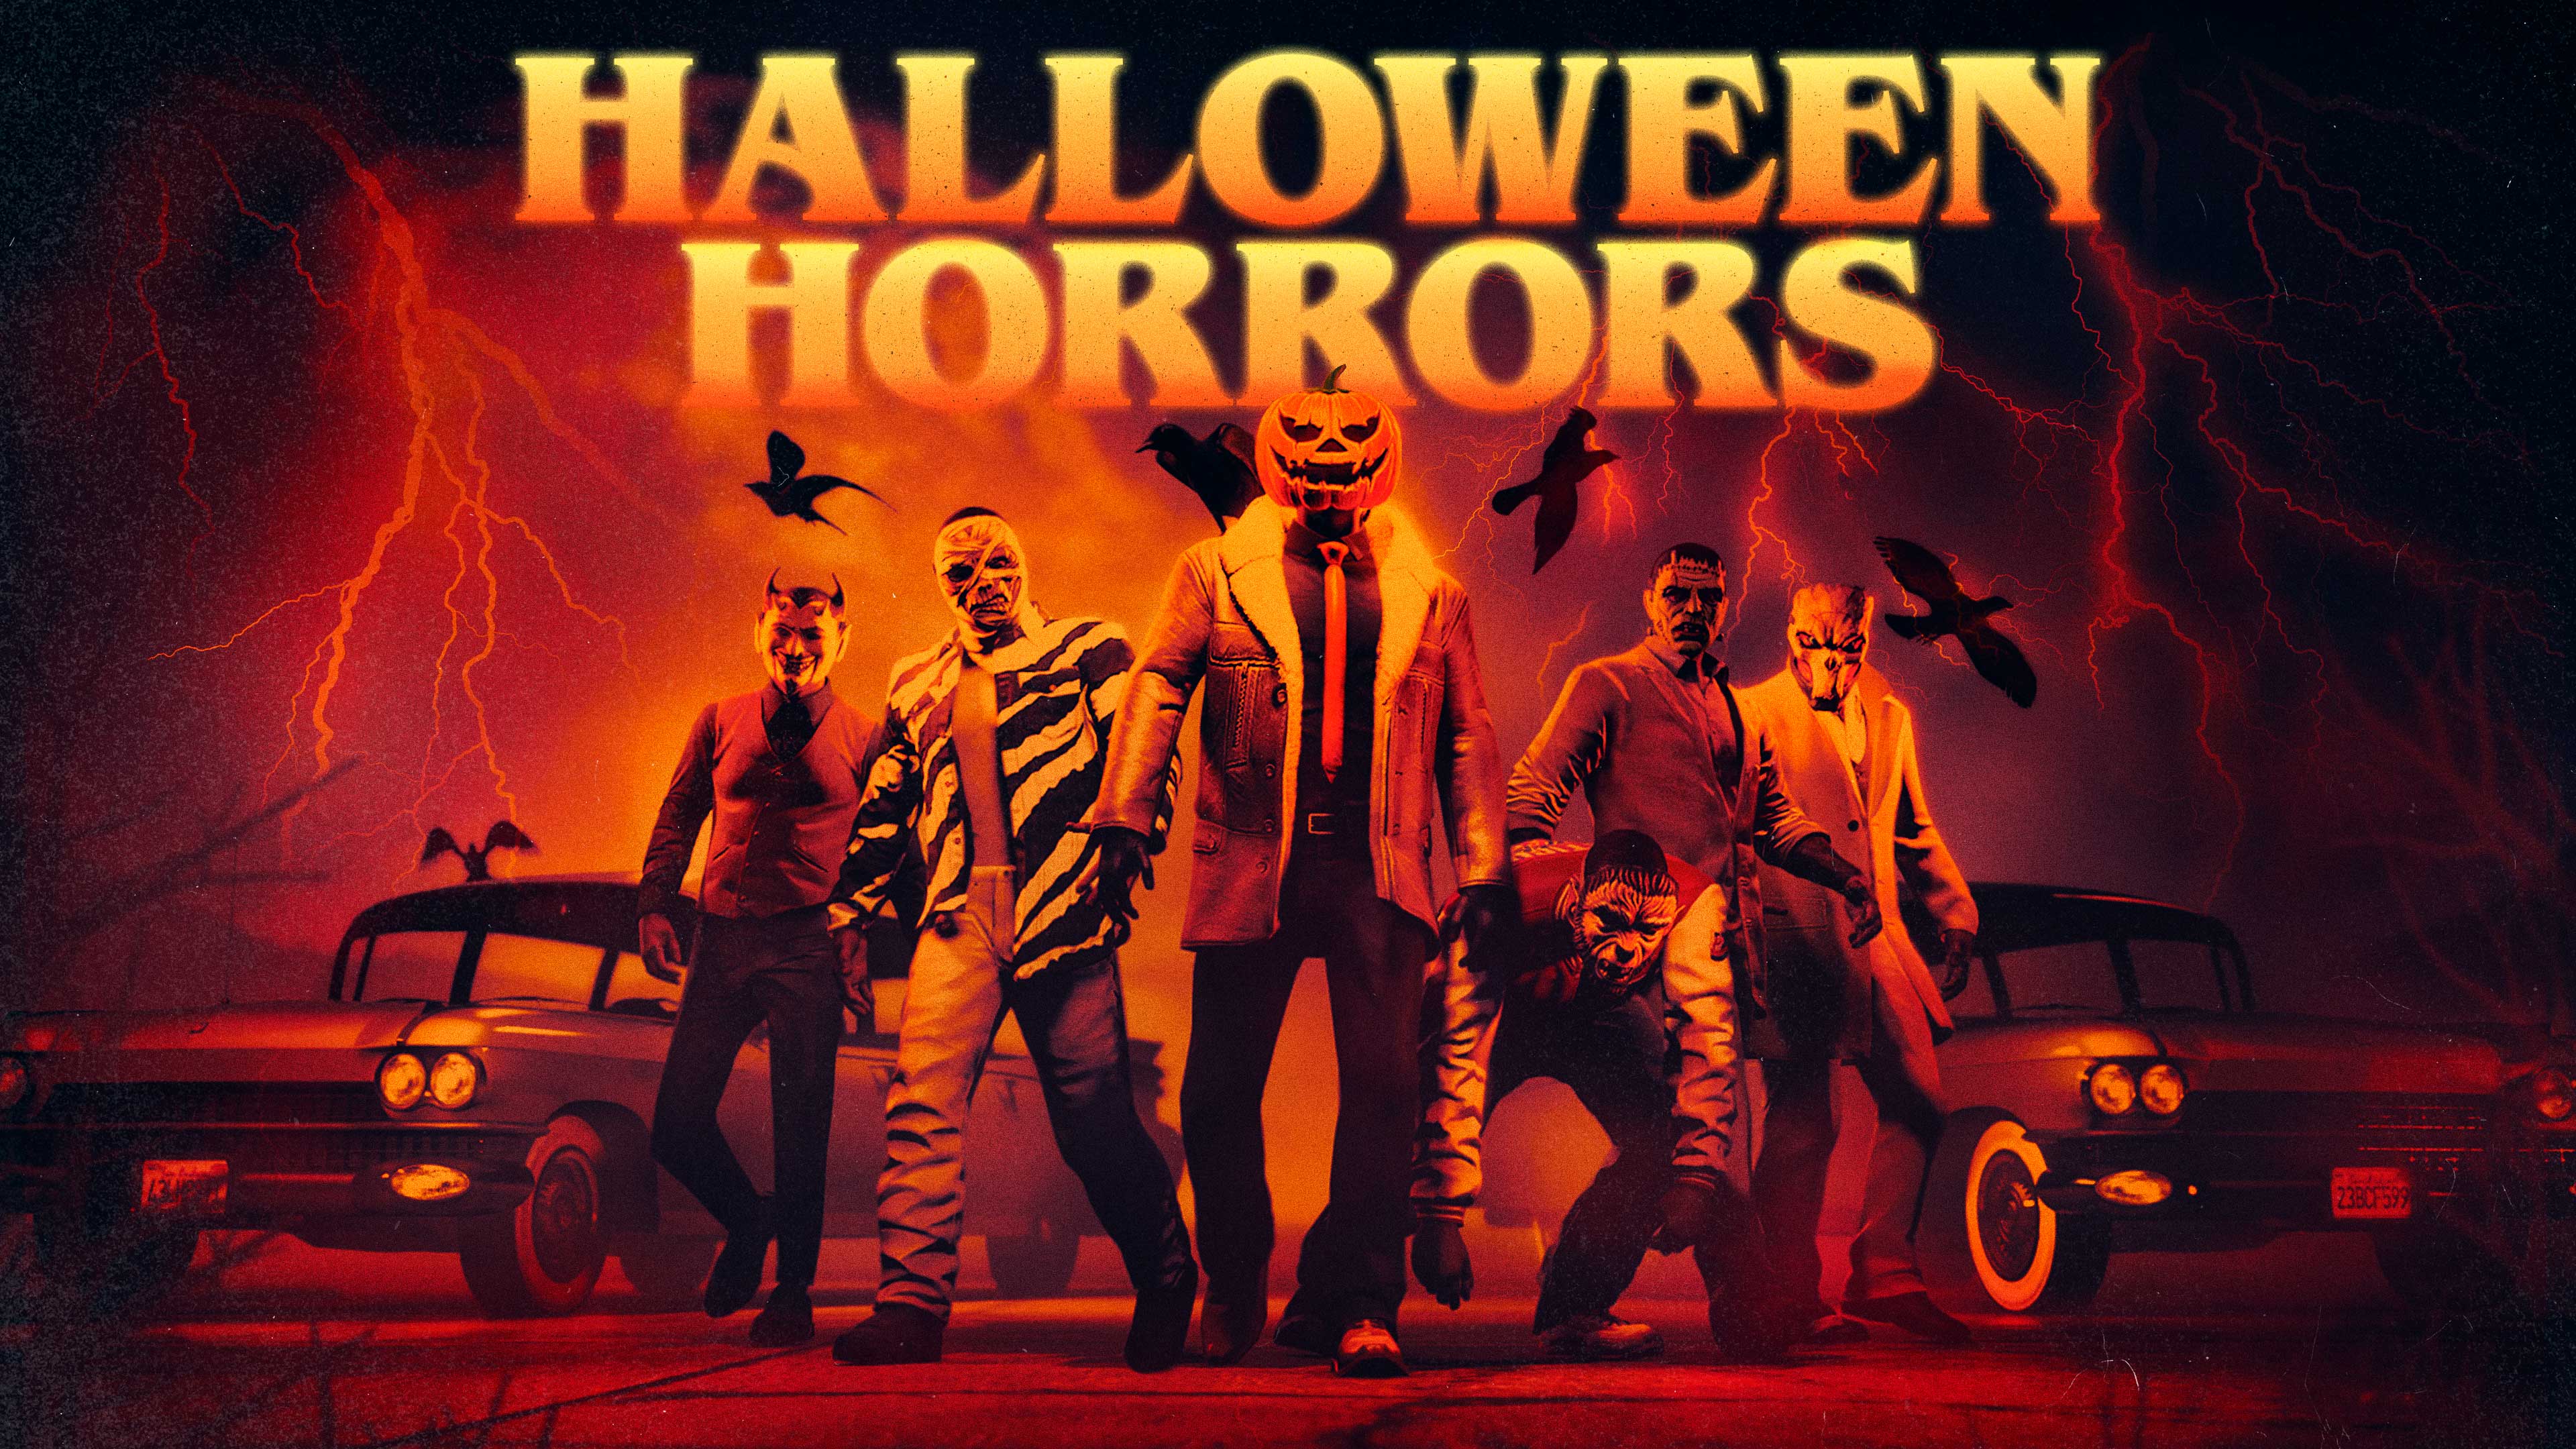 Grand Theft Auto V Evolves From Bigfoot to Aliens in Halloween Showdown